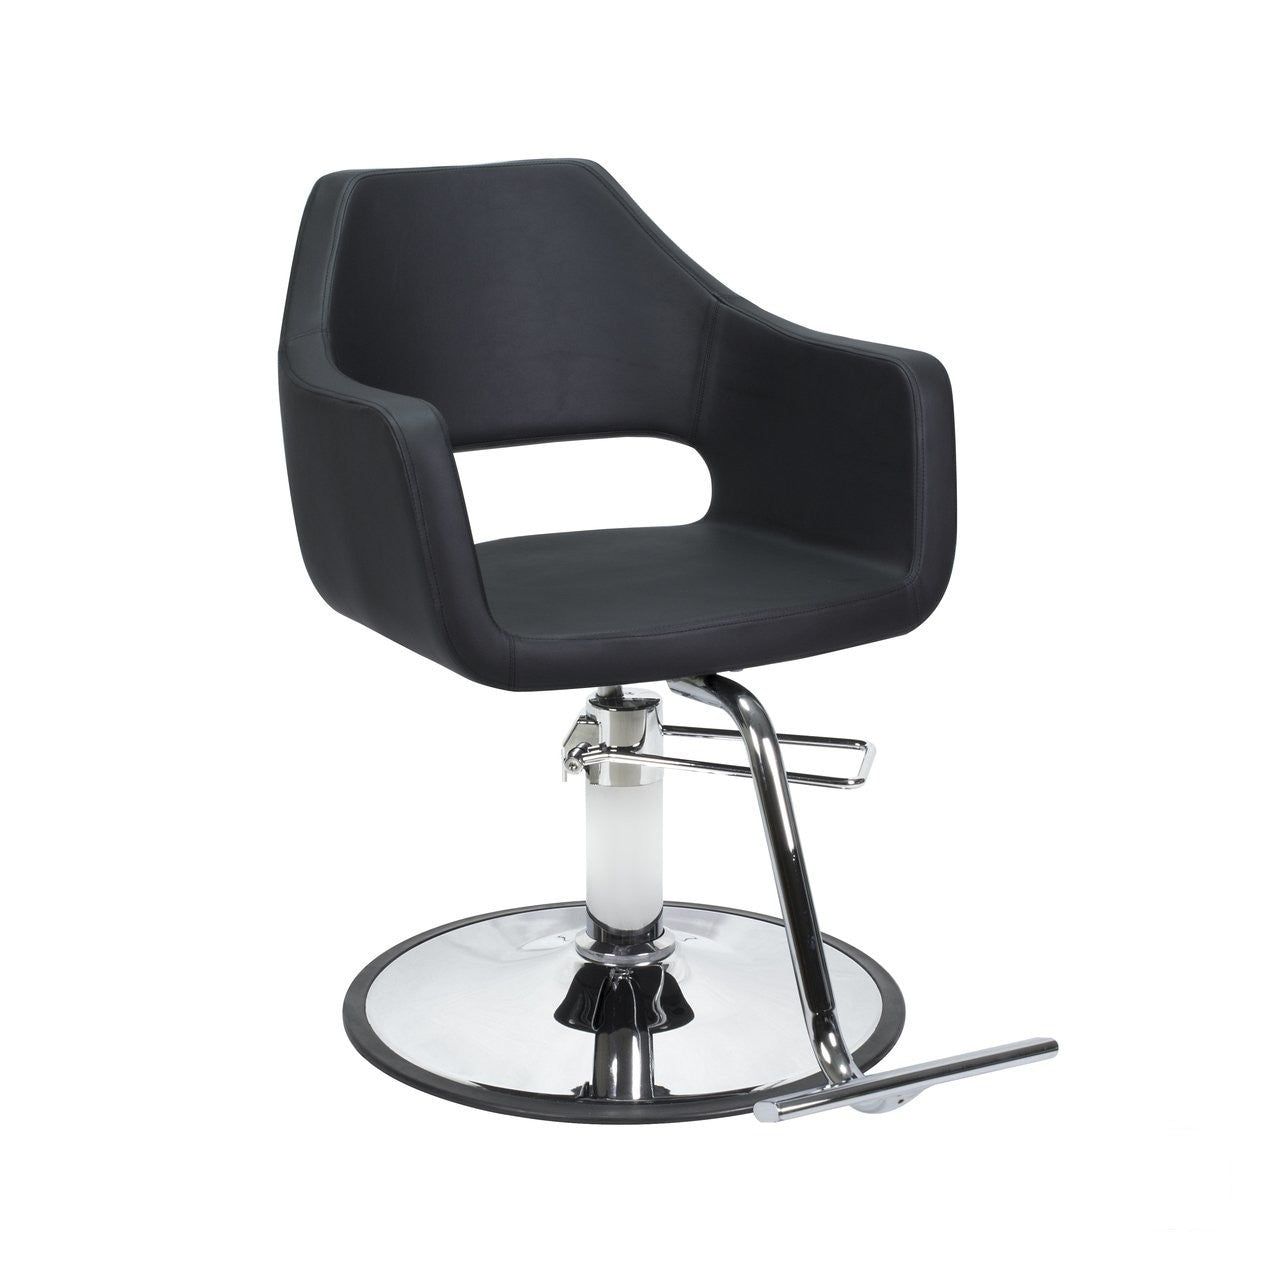 Berkeley Berkeley Richardson Styling Chair Styling Chair - ChairsThatGive